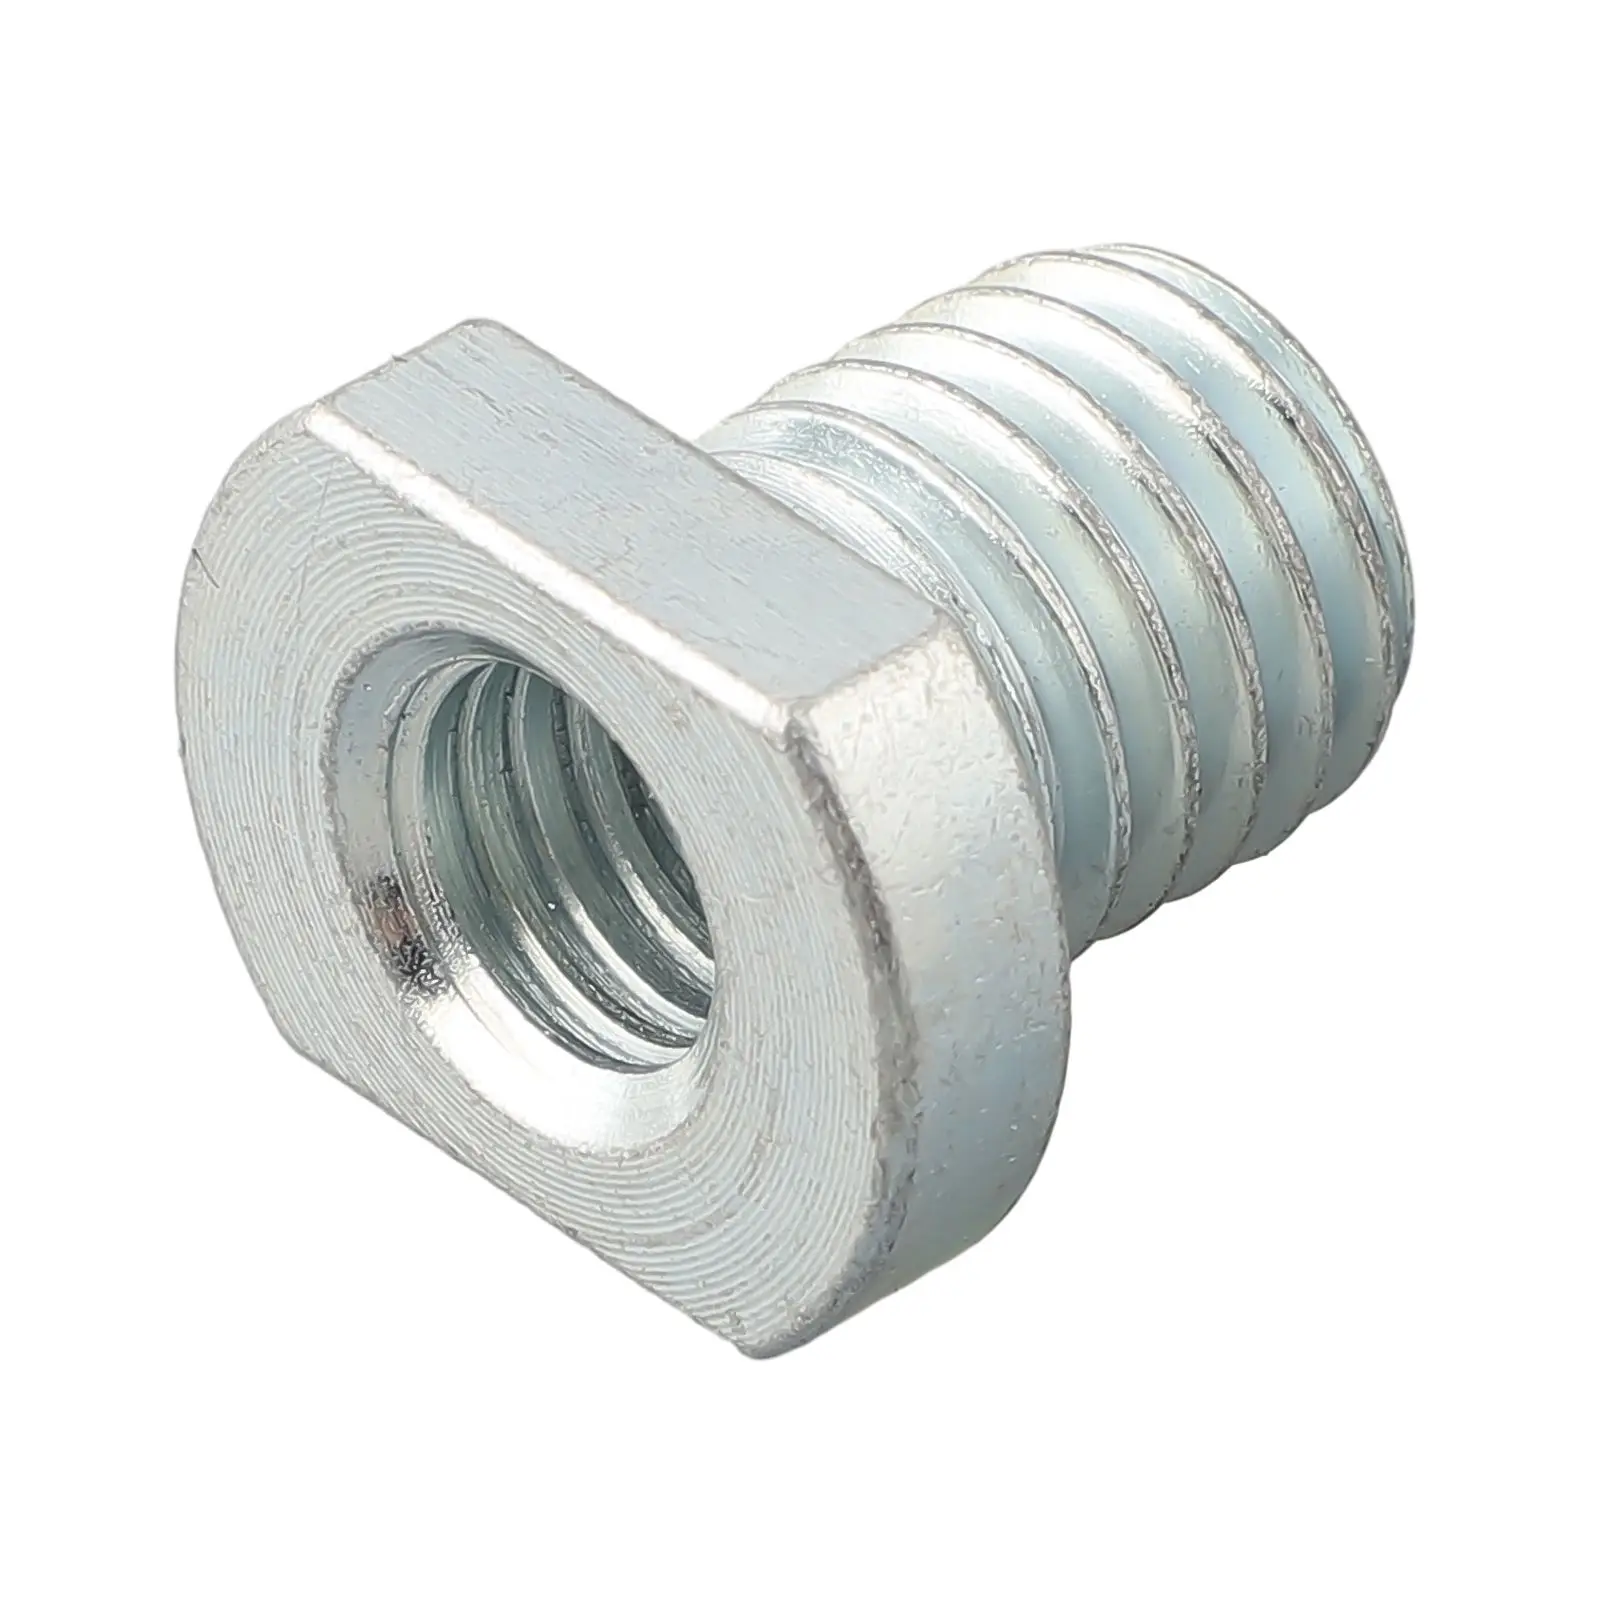 

M10 To M14/M16 Thread Converter Connector For Angle Grinder Polishing Adapter Conversion Head Parts Angle Grinder Accessories